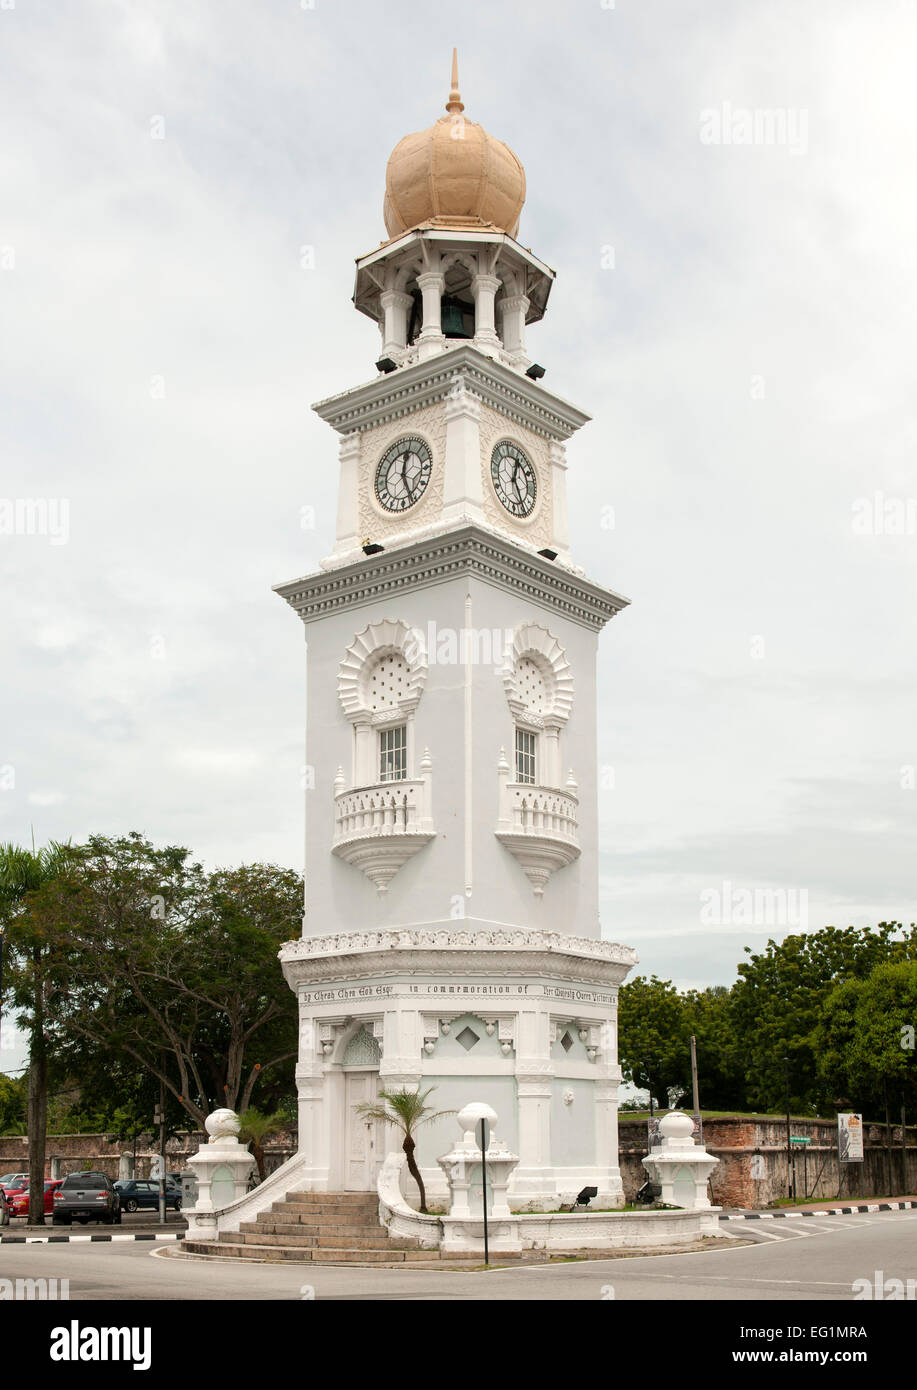 The Queen Victoria Memorial Clock Tower in George Town, Penang, Malaysia. Stock Photo